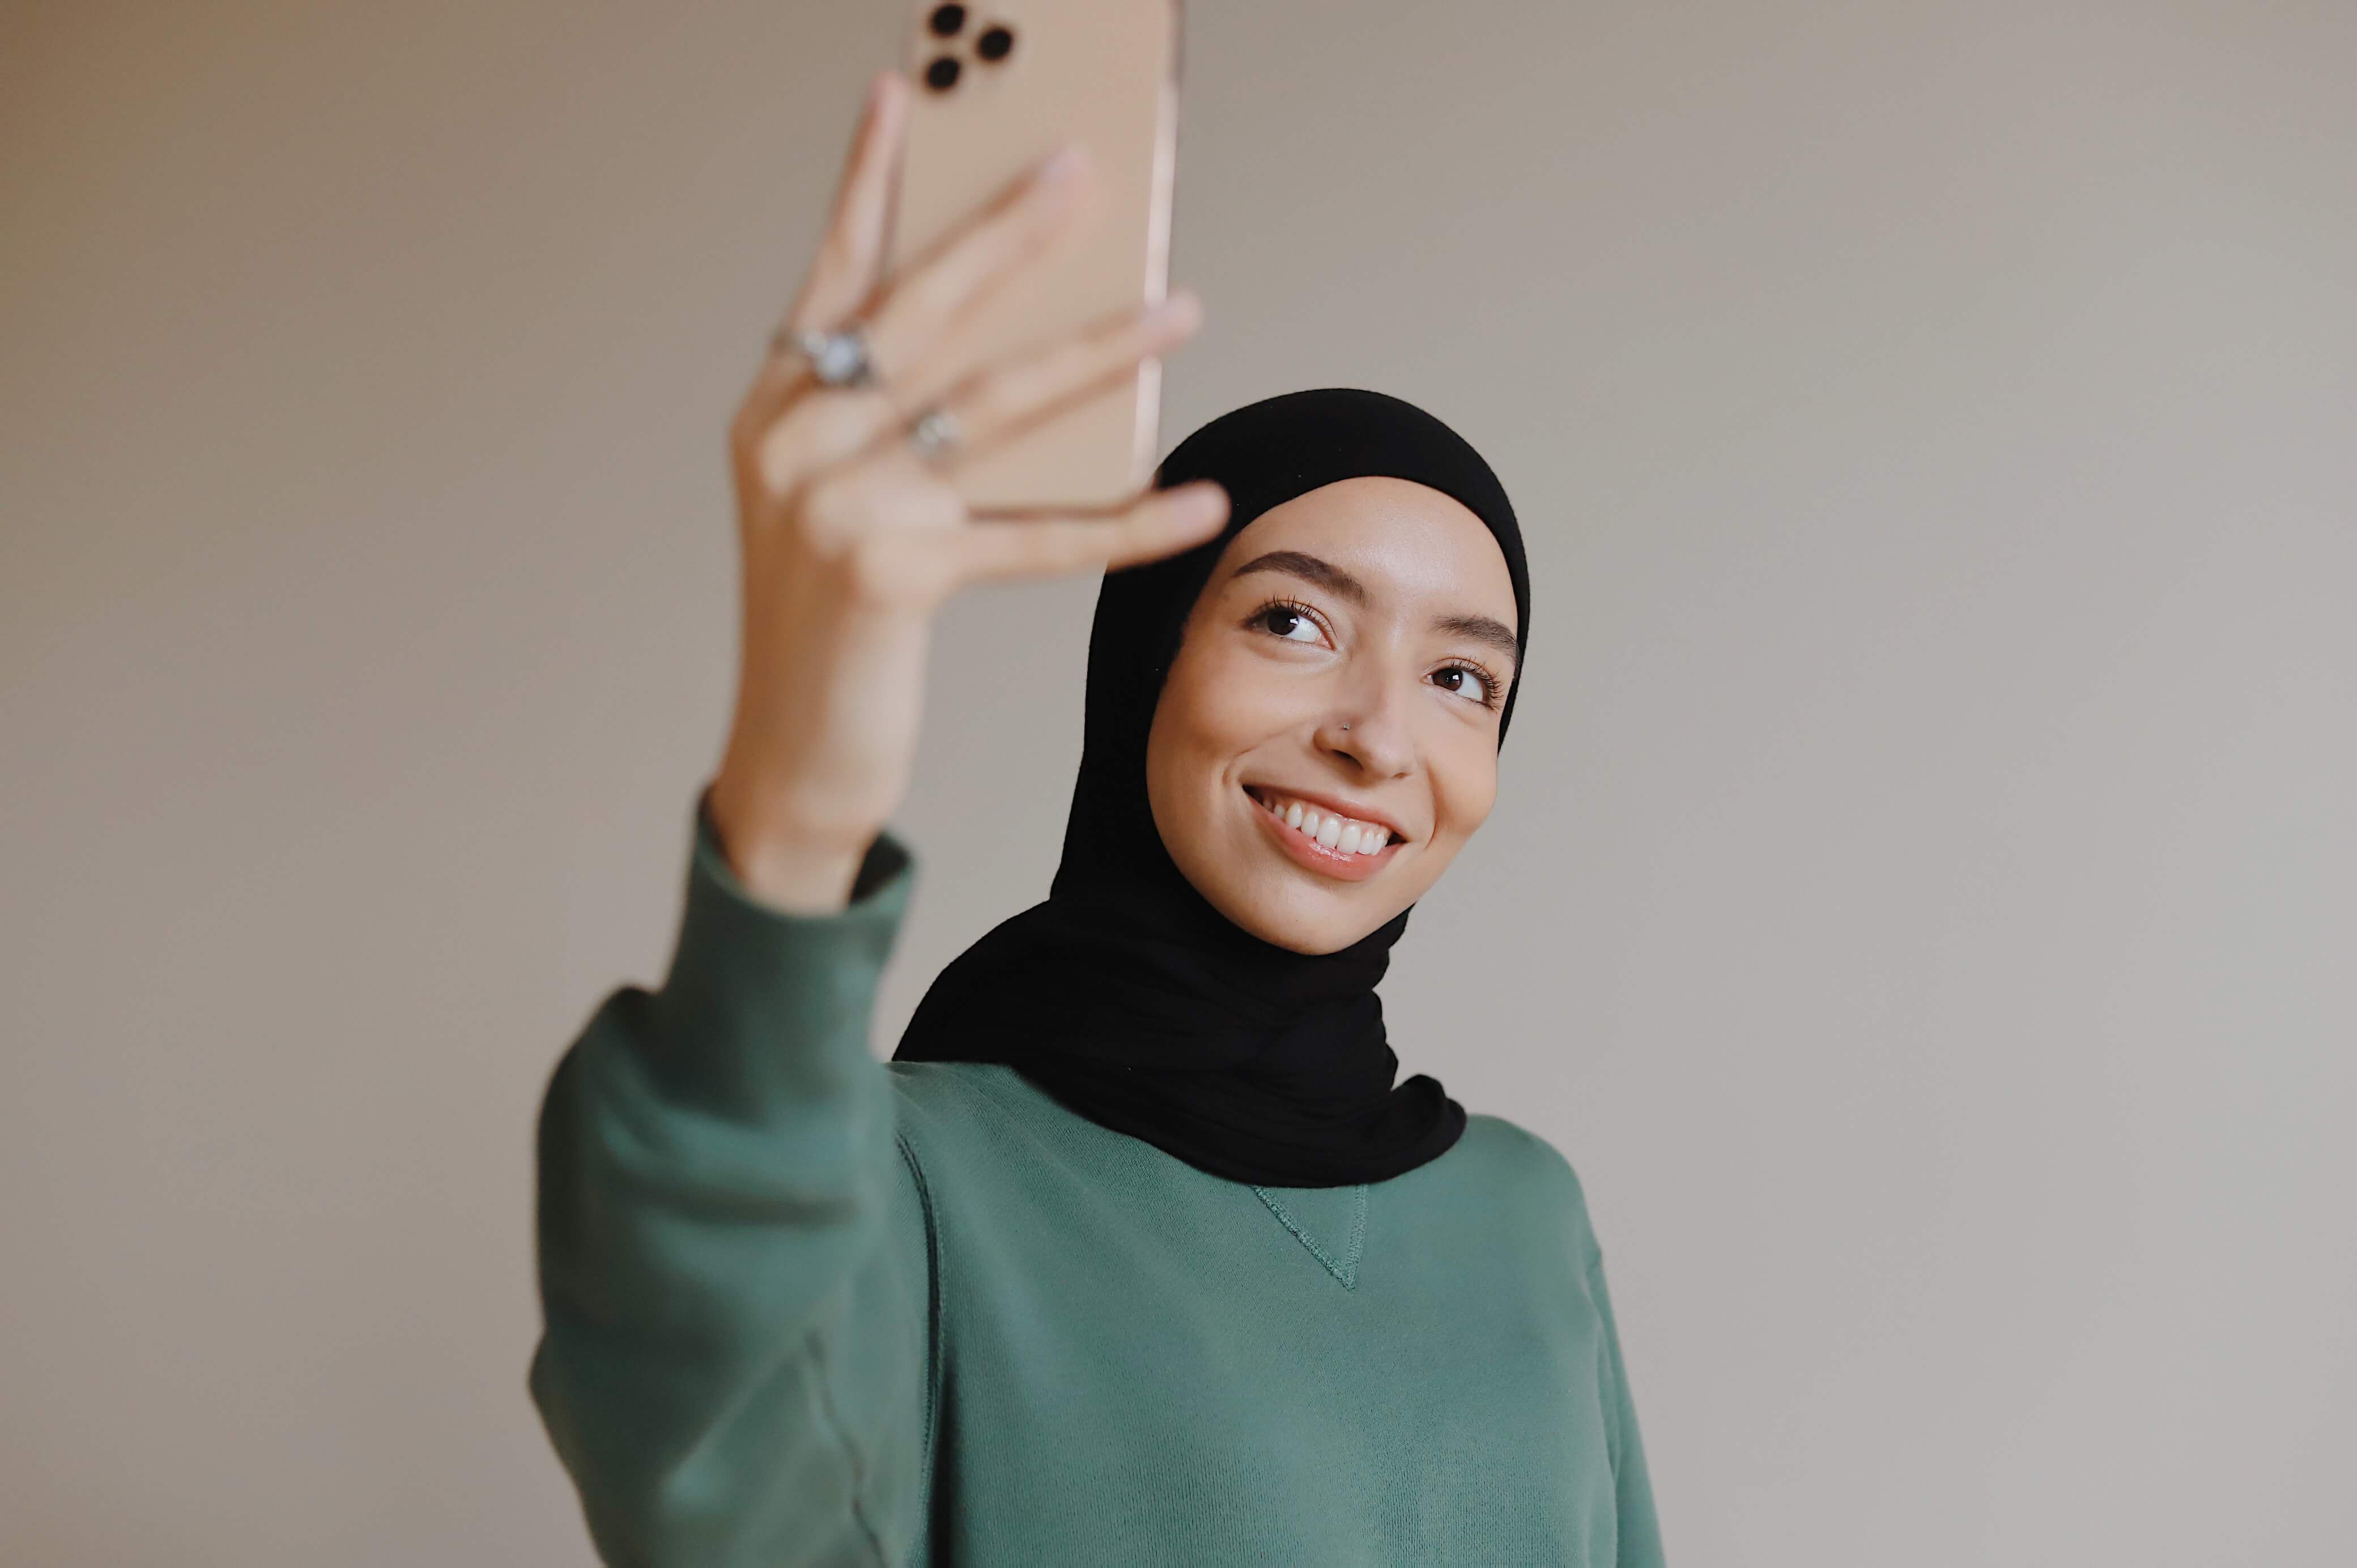 An influencer wearing a hijab takes a selfie.